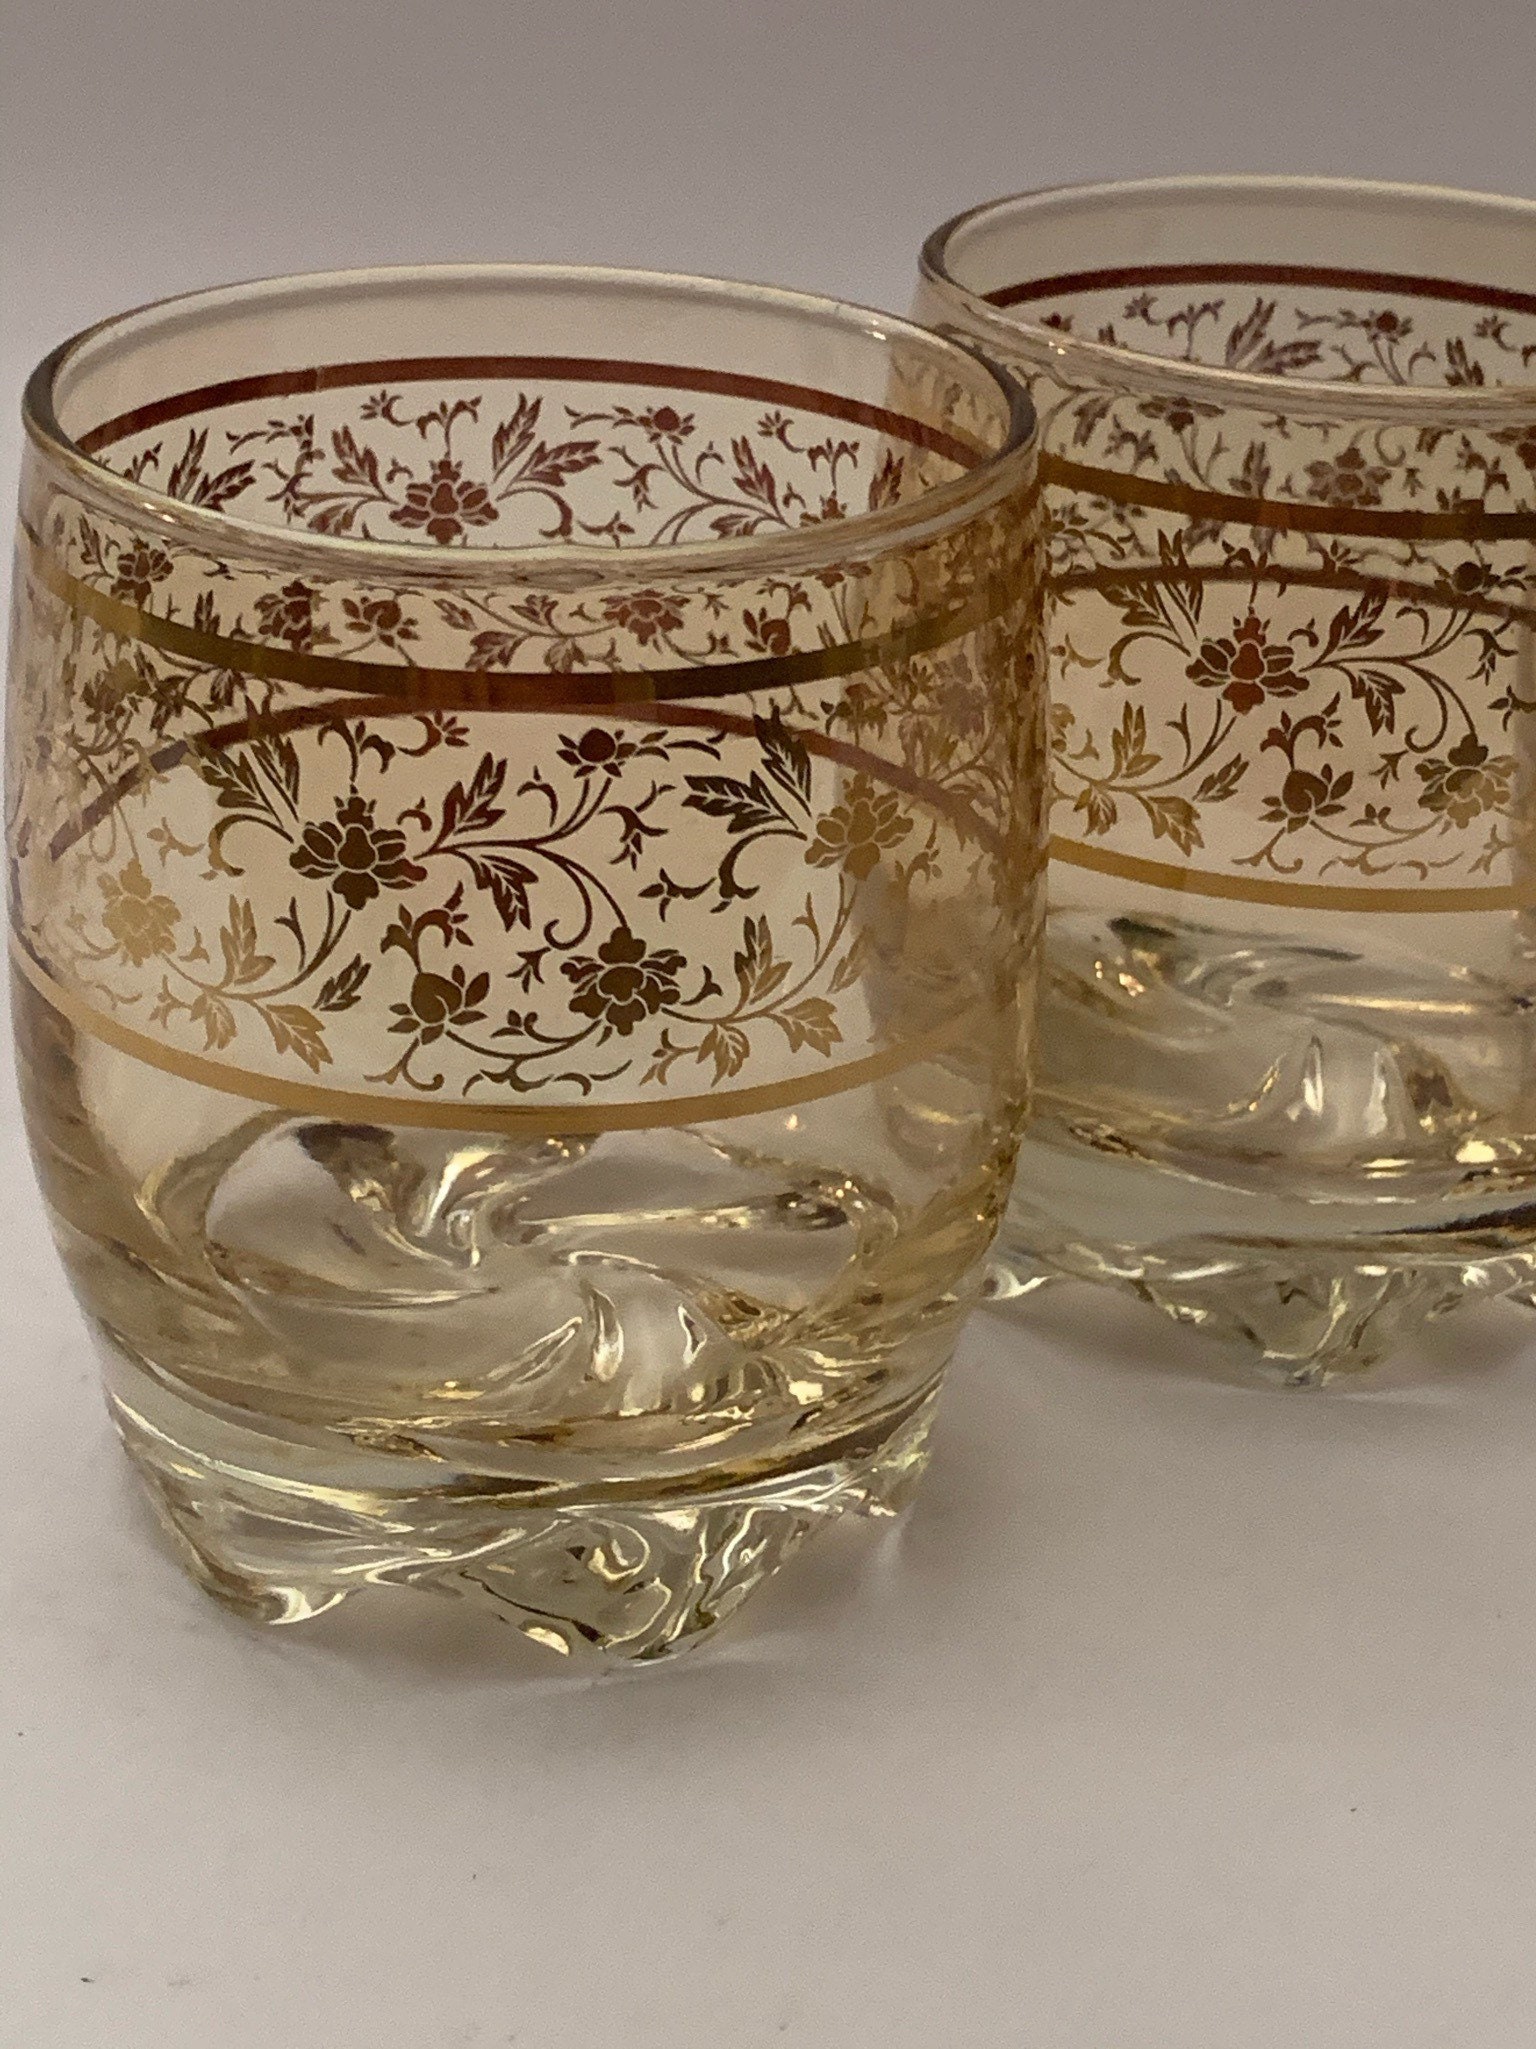 Exquisite Amber and Gold Old Fashion / Cocktail glasses Set | Etsy